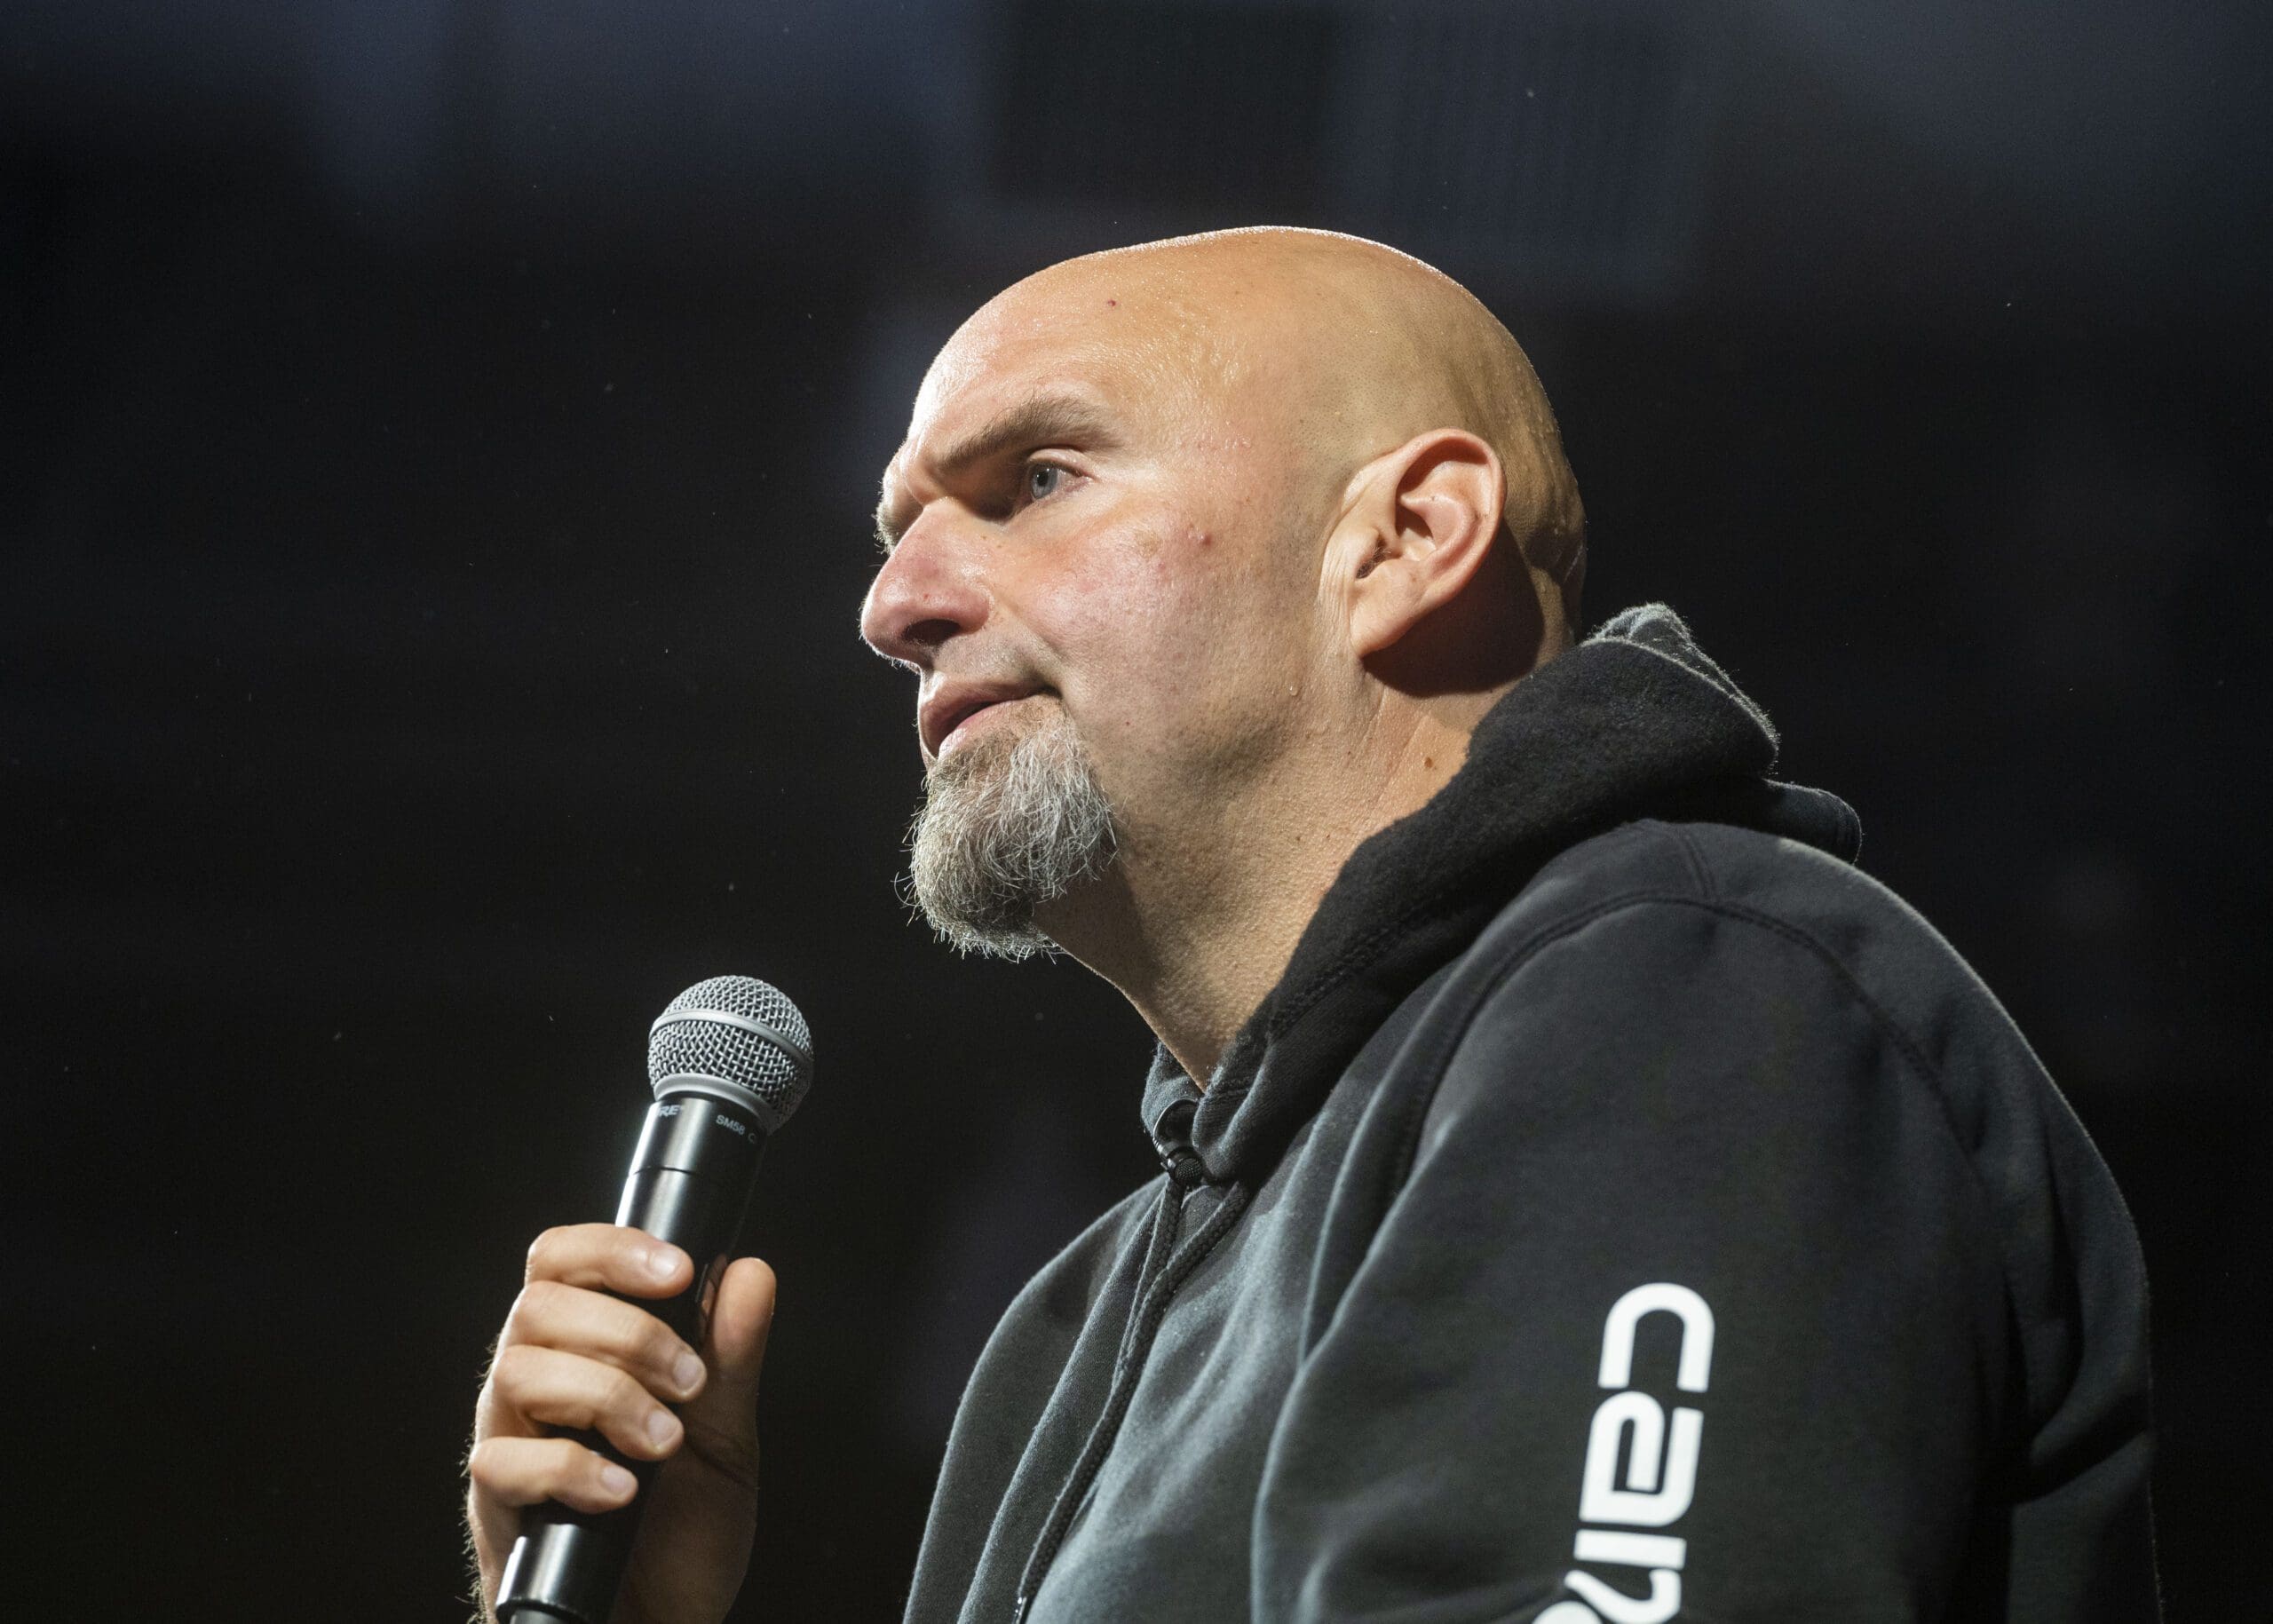 tests-‚rule-out-a-new-stroke‘-for-fetterman,-spokesperson-says